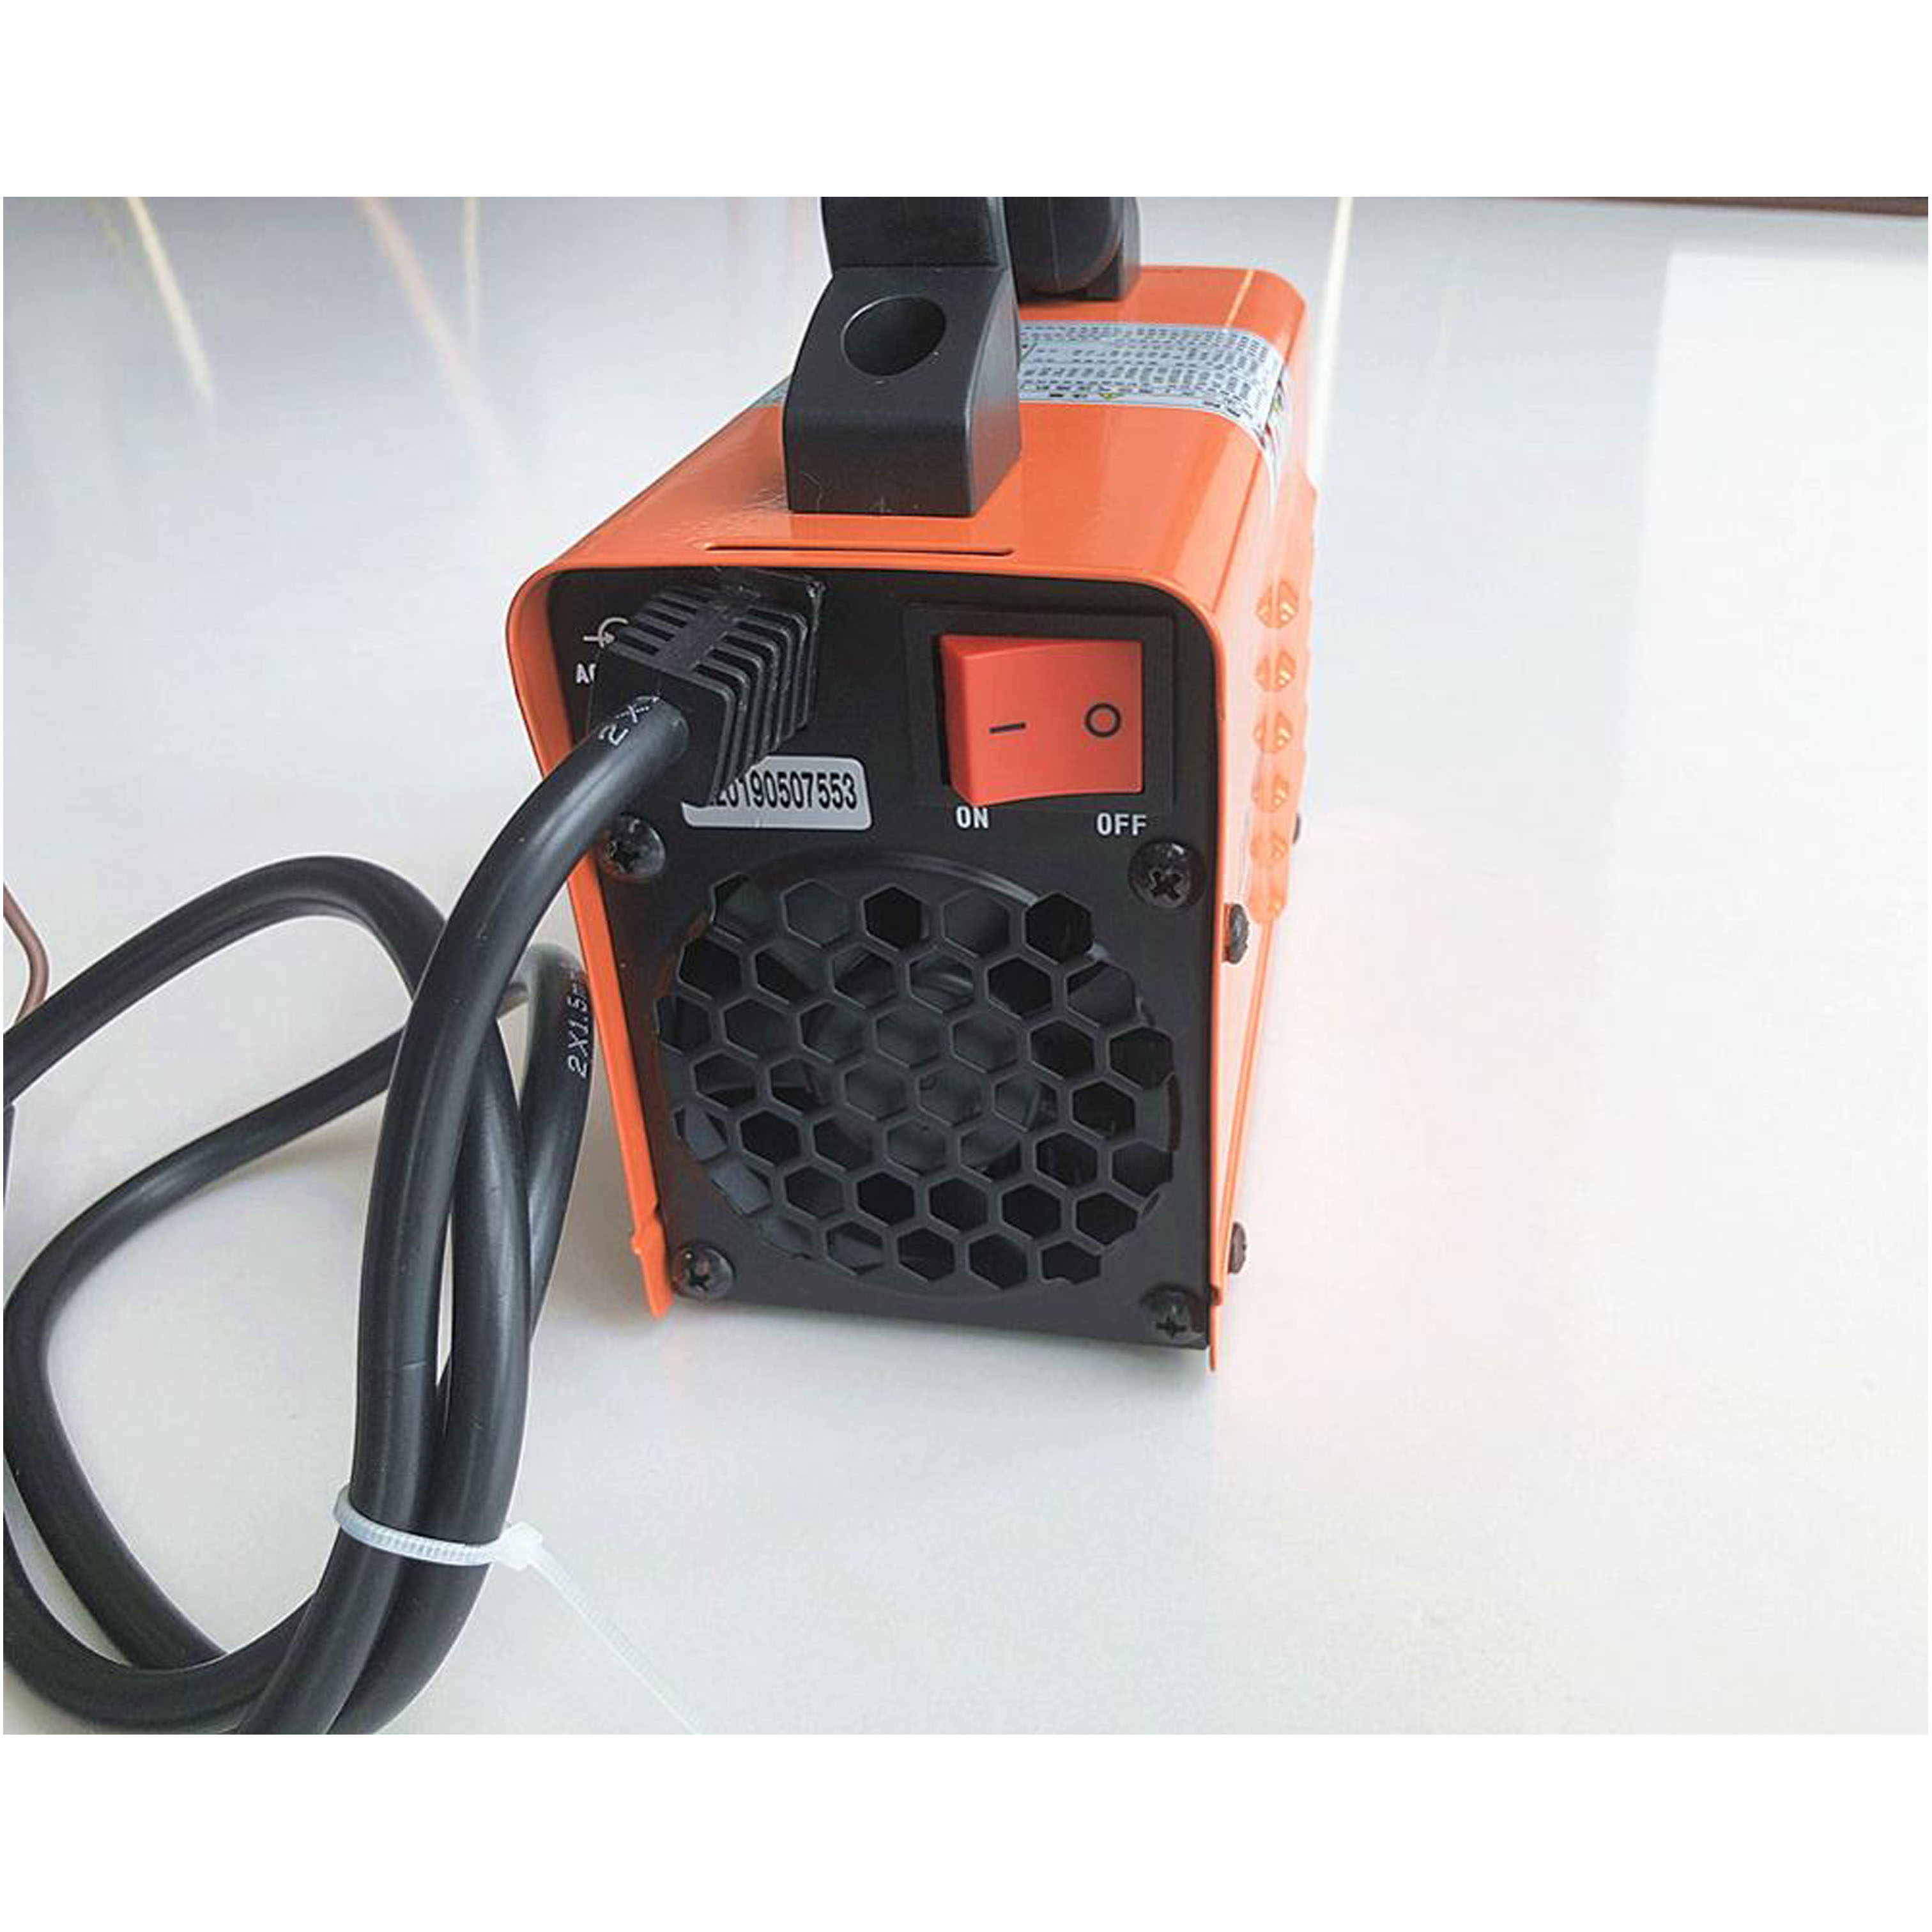 RU delivery Electric arc welder inverter Electric Welding Machine 200A arc welder inverter for Welding Working and Electric